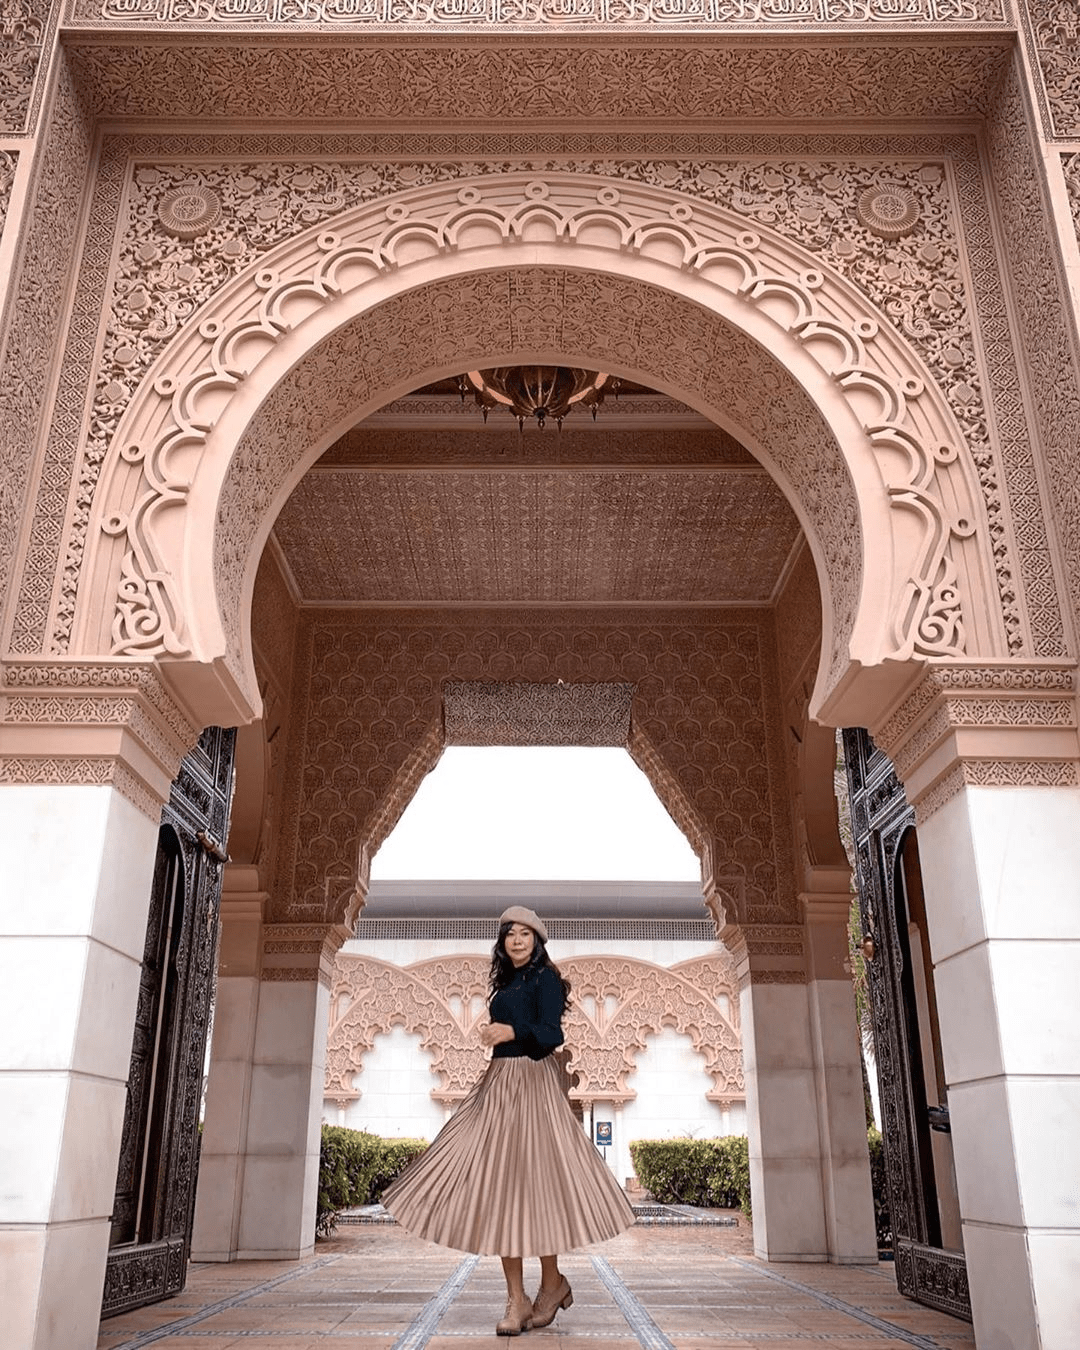 Things To Do In Putrajaya Guide - arch